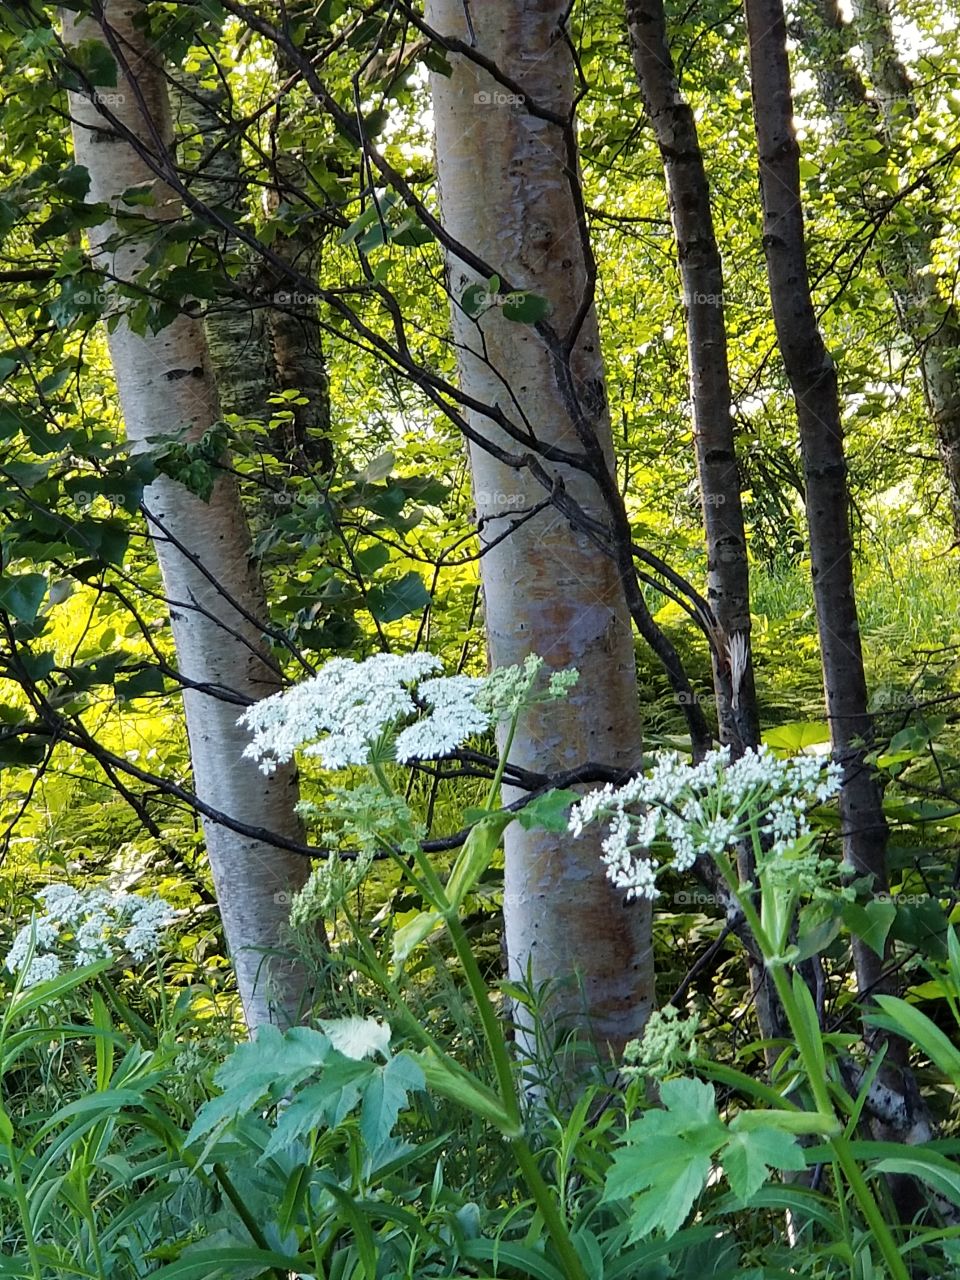 cow parsley flowers and birch trees